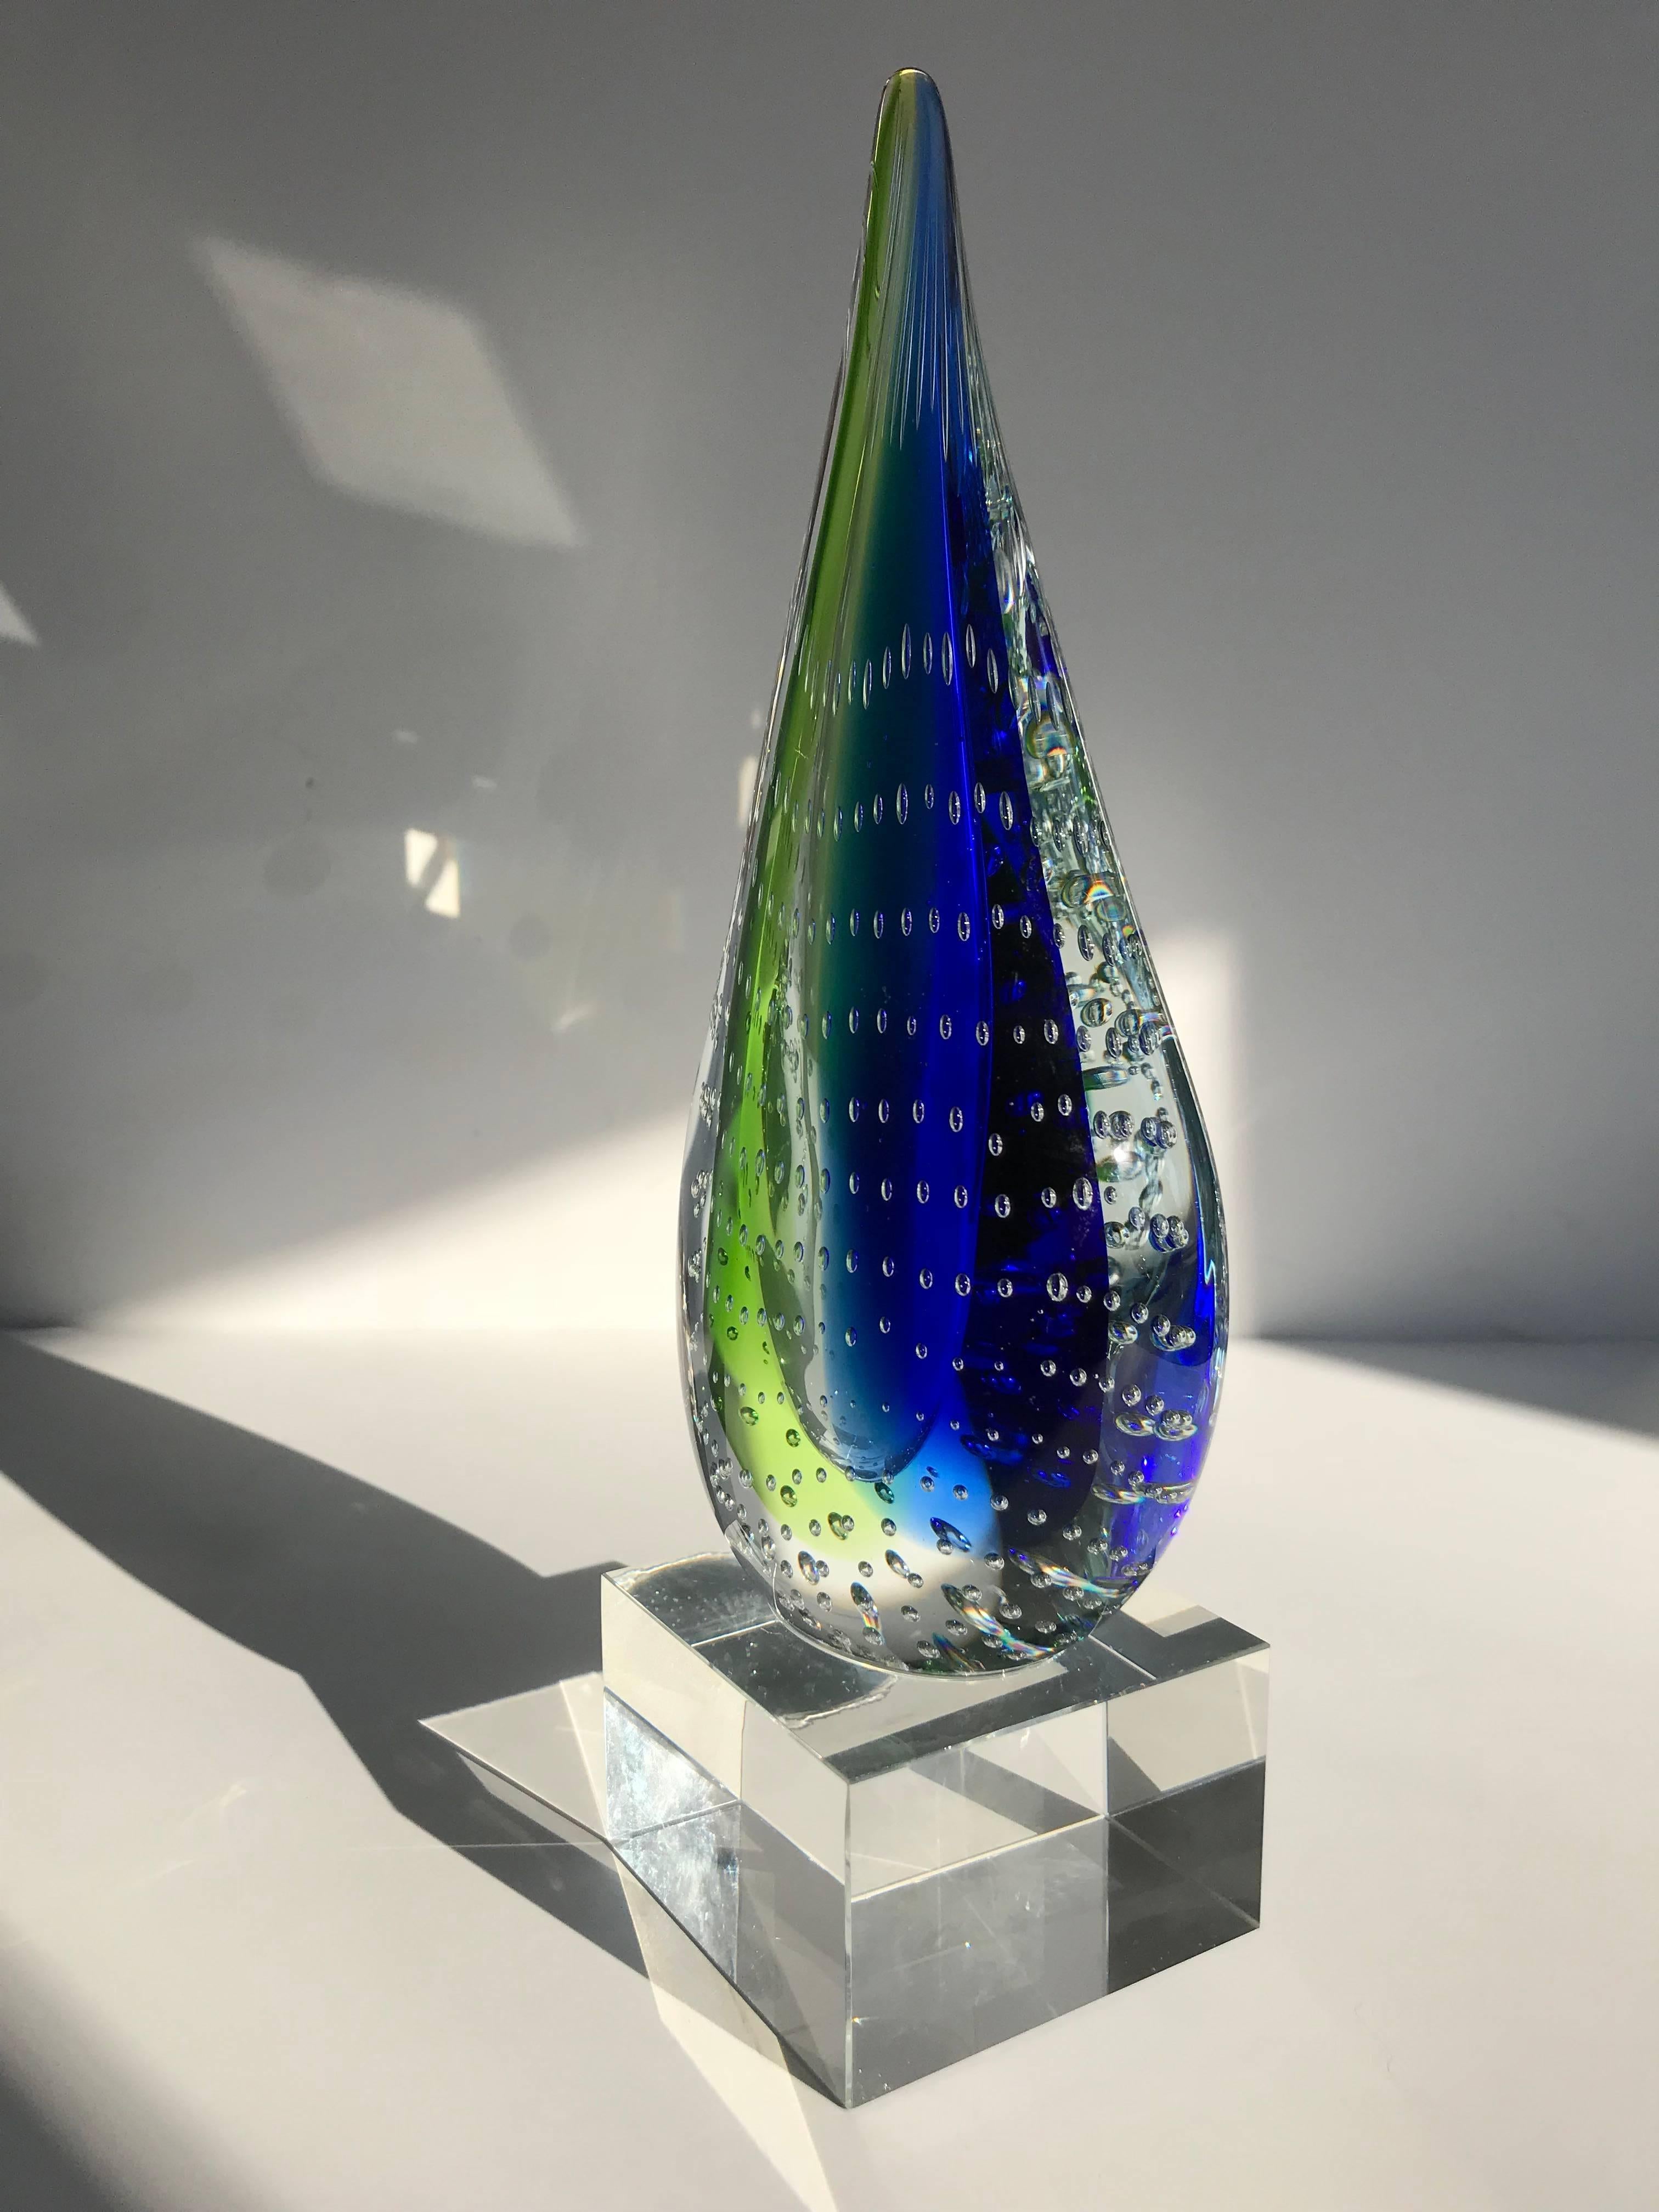 Polished Teardrop Murano Sculpture in Green and Blue Sommerso Glass, Italy, c. 1980s